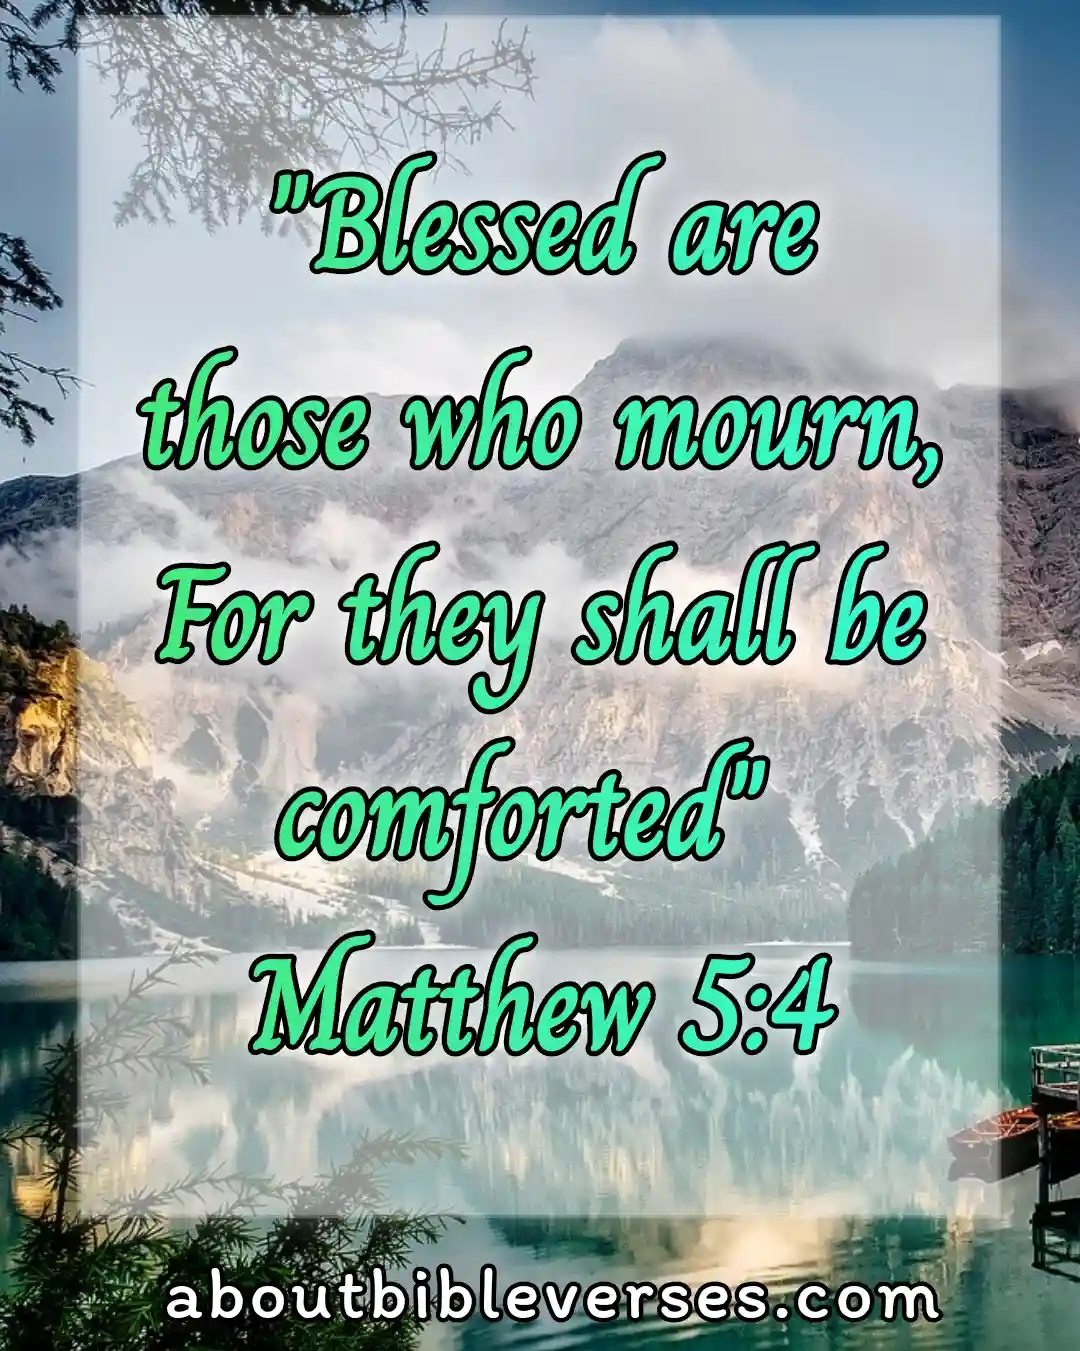 Bible Verses About Pain And Suffering (Matthew 5:4)